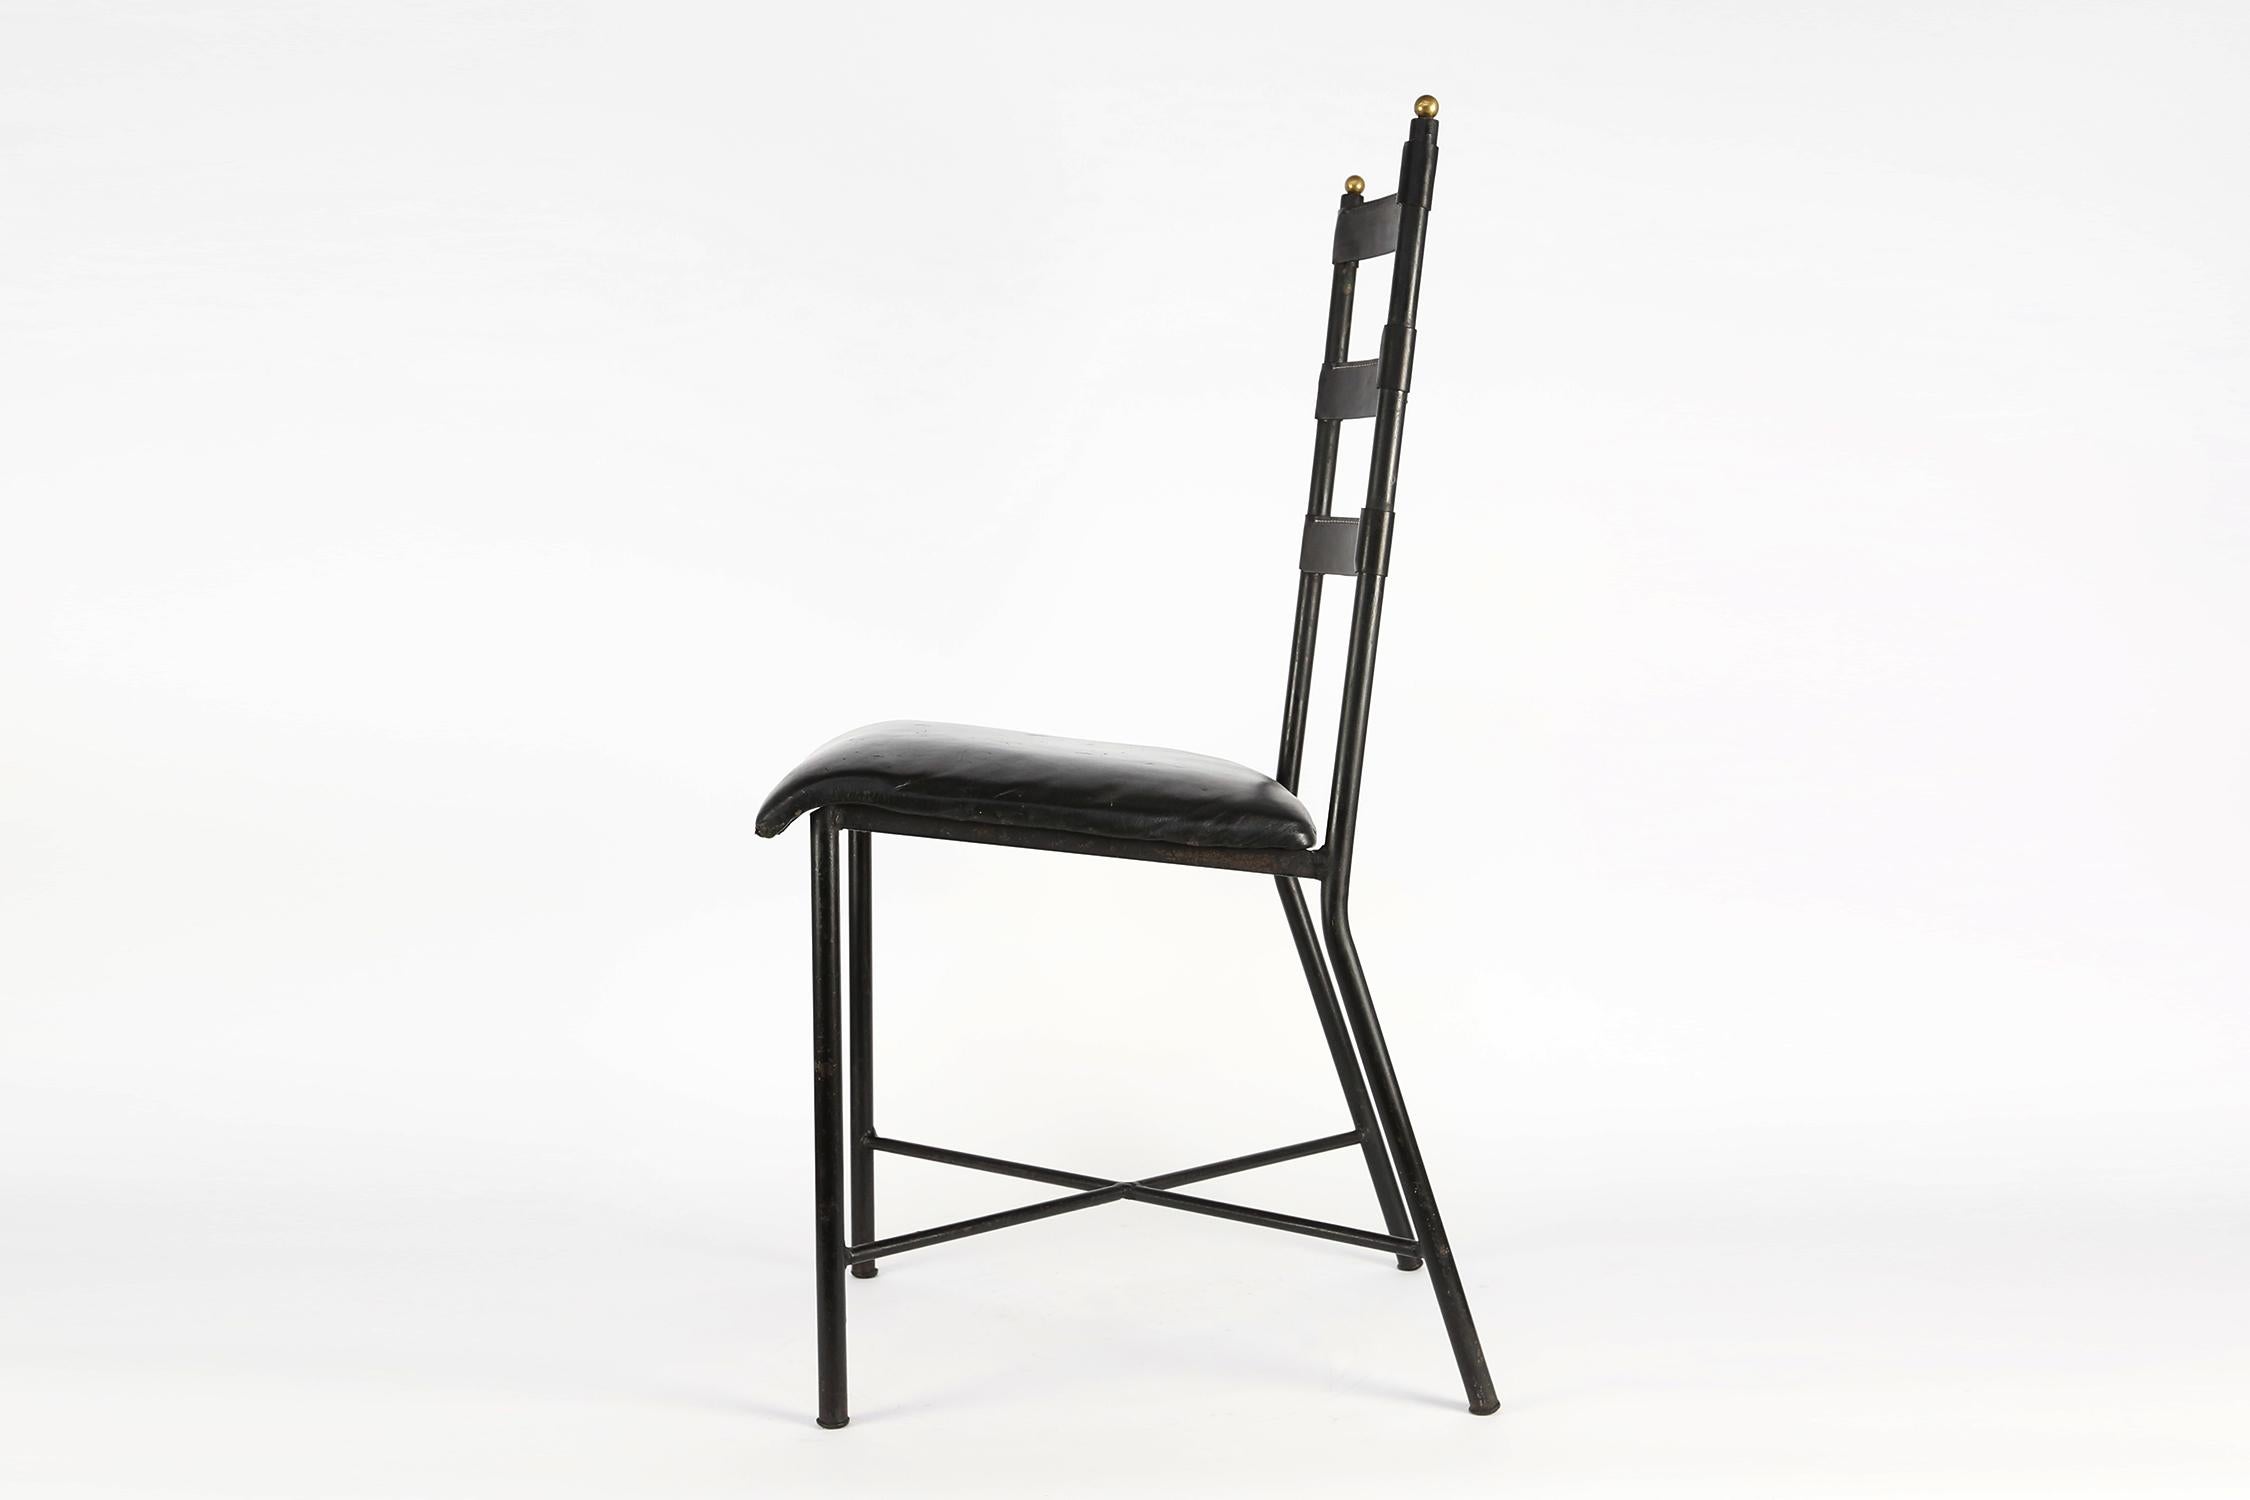 Side chair by French designer Jacques Adnet.
Black lacquered metal frame with brass details with stitched black leather seat and backrest,
circa 1960s.
Great patina.